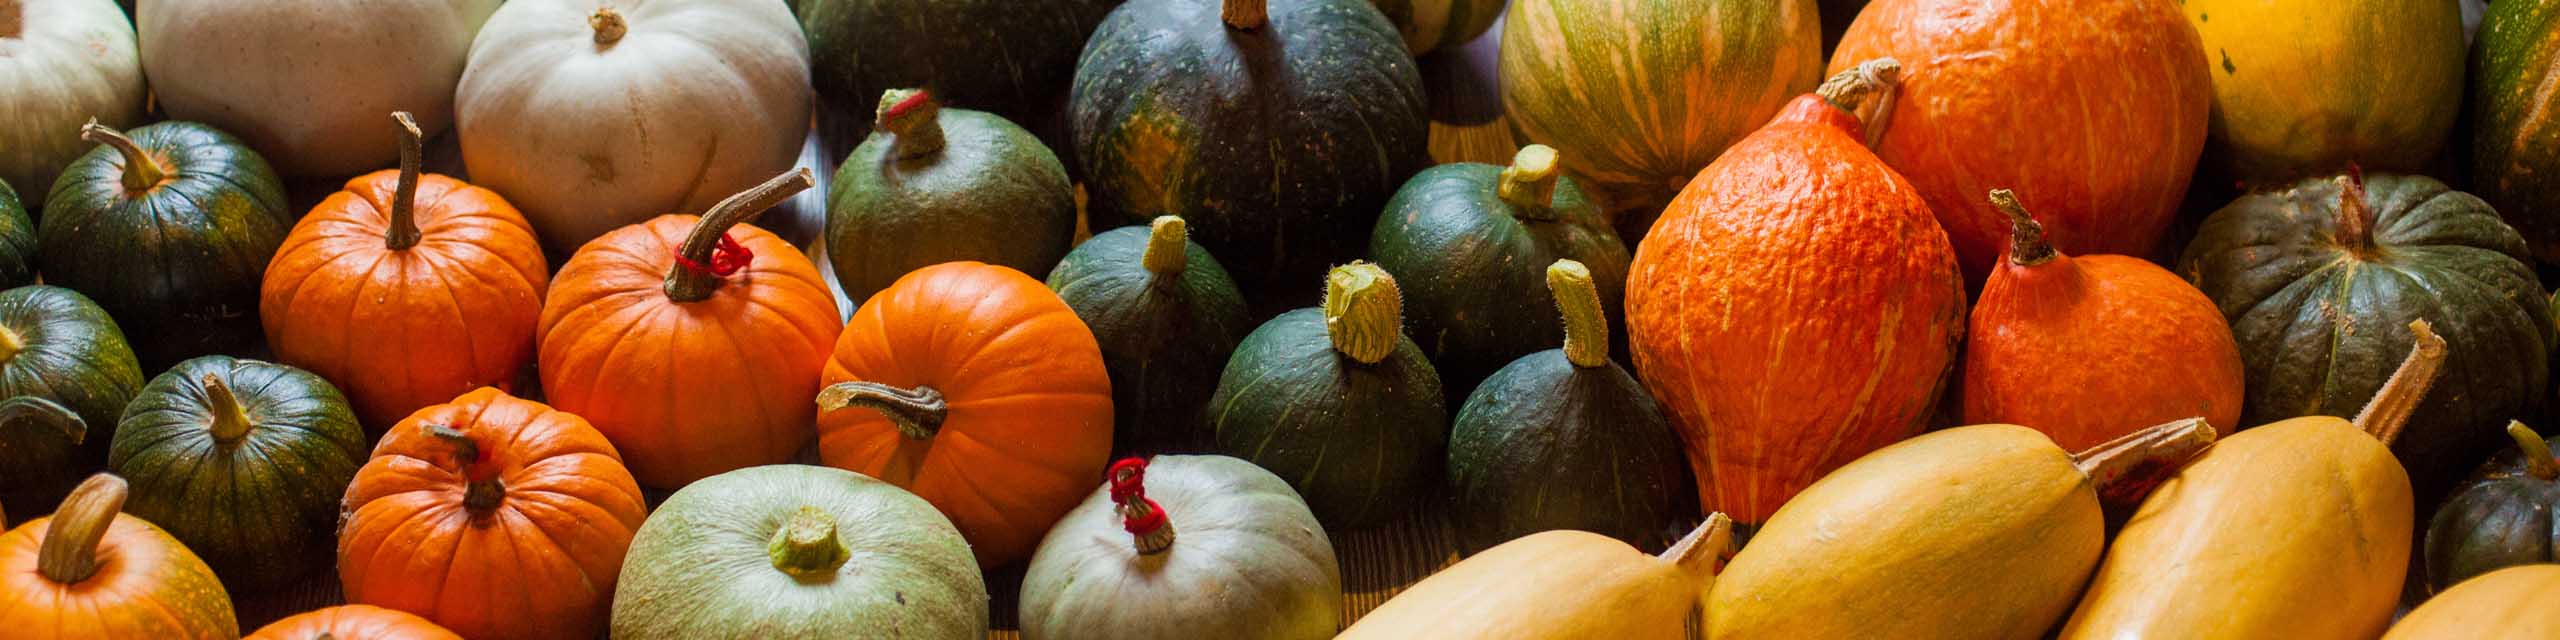 Different types of squash and pumpkins.